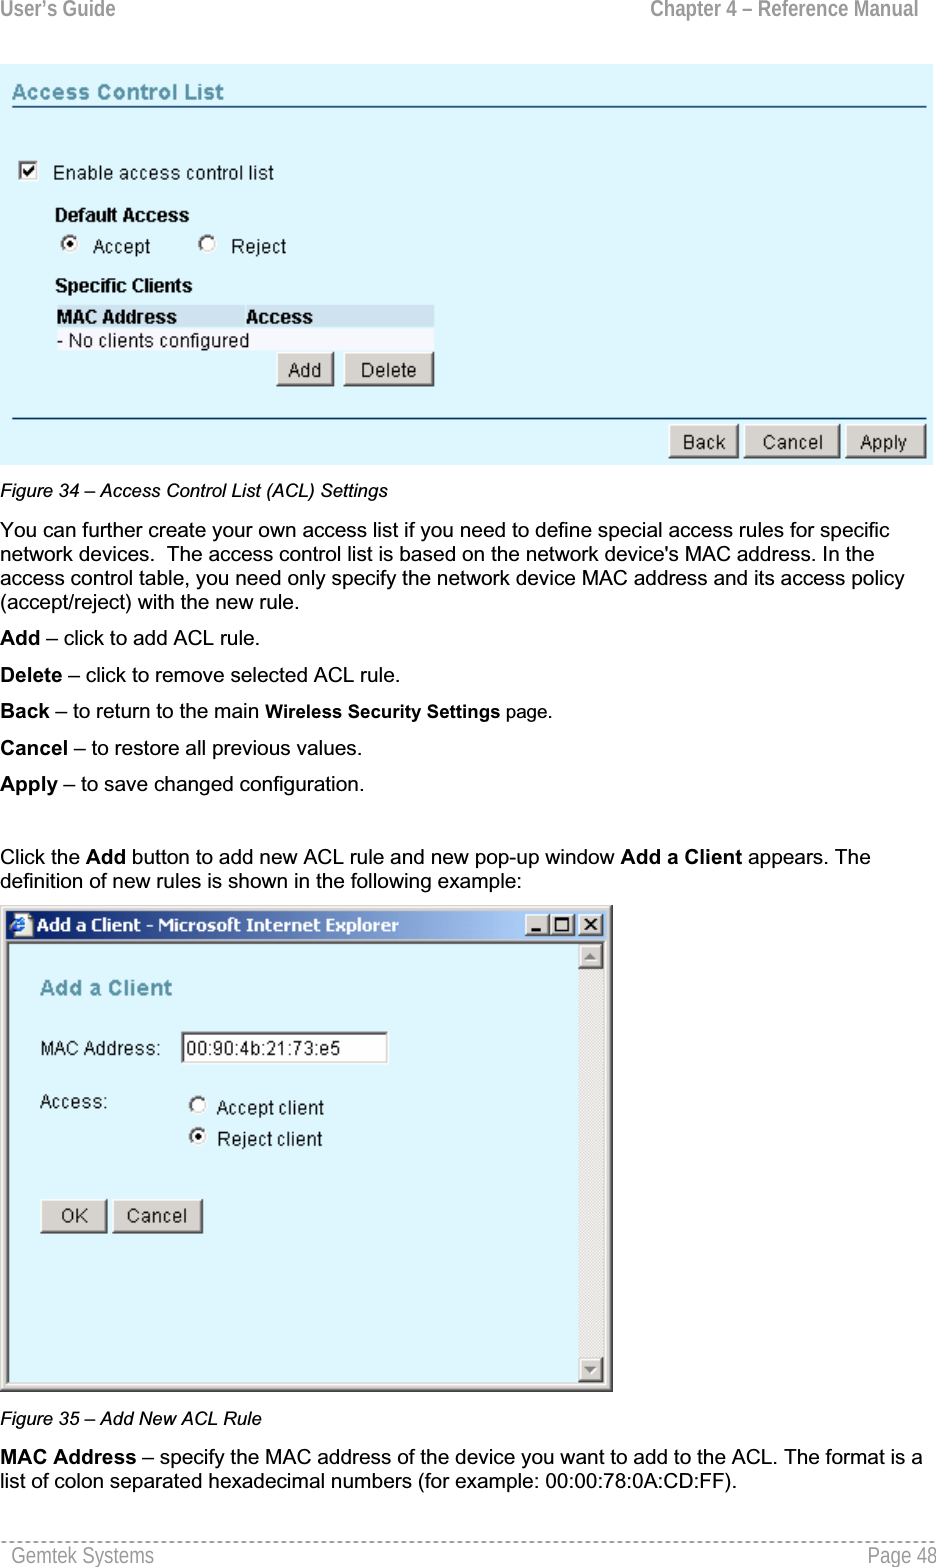 User’s Guide  Chapter 4 – Reference ManualFigure 34 – Access Control List (ACL) Settings You can further create your own access list if you need to define special access rules for specificnetwork devices.  The access control list is based on the network device&apos;s MAC address. In the access control table, you need only specify the network device MAC address and its access policy (accept/reject) with the new rule. Add – click to add ACL rule.Delete – click to remove selected ACL rule.Back – to return to the main Wireless Security Settings page.Cancel – to restore all previous values.Apply – to save changed configuration.Click the Add button to add new ACL rule and new pop-up window Add a Client appears. Thedefinition of new rules is shown in the following example:Figure 35 – Add New ACL RuleMAC Address – specify the MAC address of the device you want to add to the ACL. The format is a list of colon separated hexadecimal numbers (for example: 00:00:78:0A:CD:FF).Gemtek Systems  Page 48